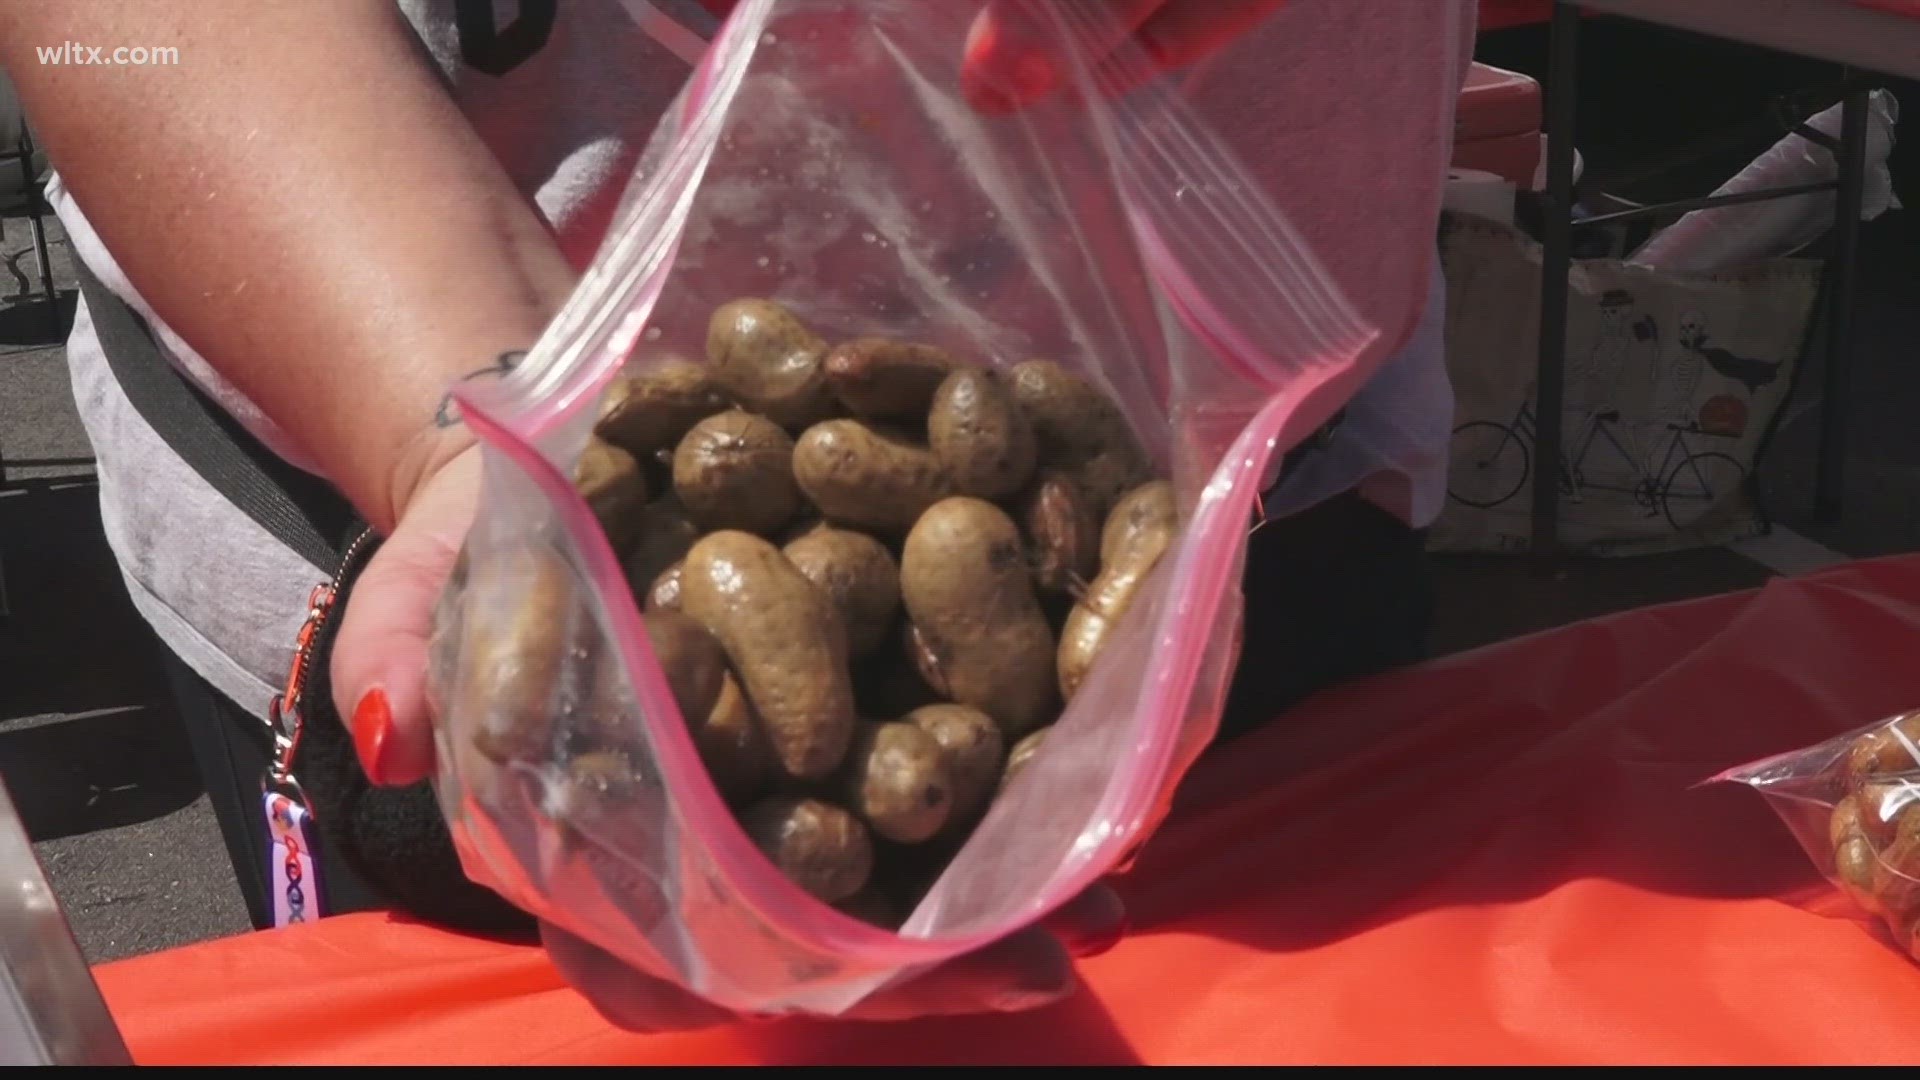 Teams from across the Palmetto State came together to share their flavors with the Columbia community and compete for the title of 'Best Boiled Peanut.'